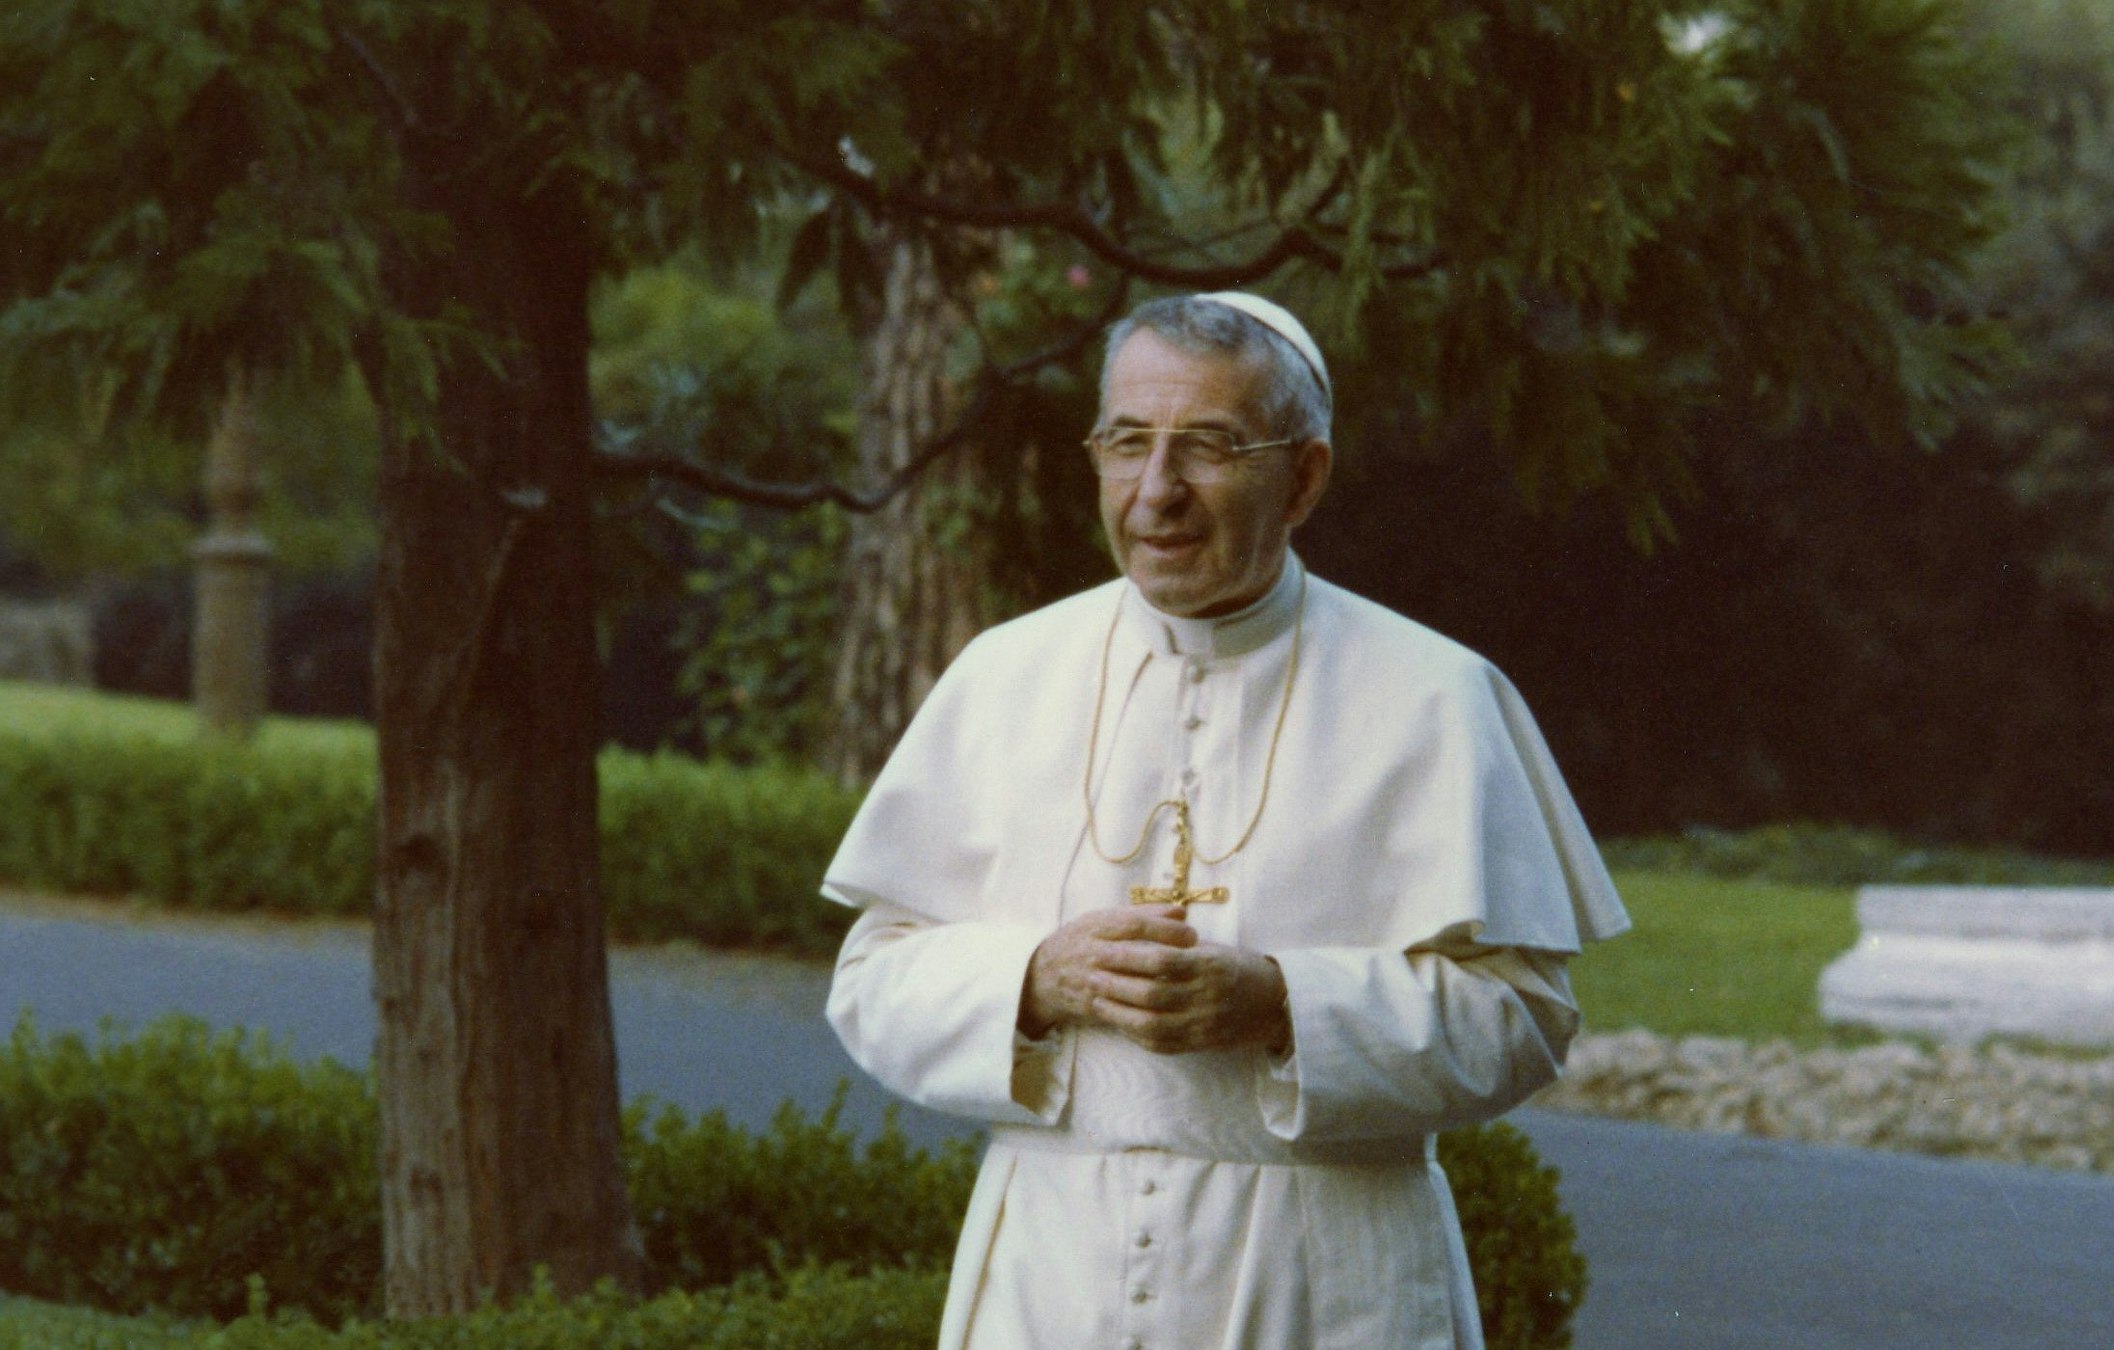 Schedule released for beatification of Pope John Paul I - Detroit Catholic